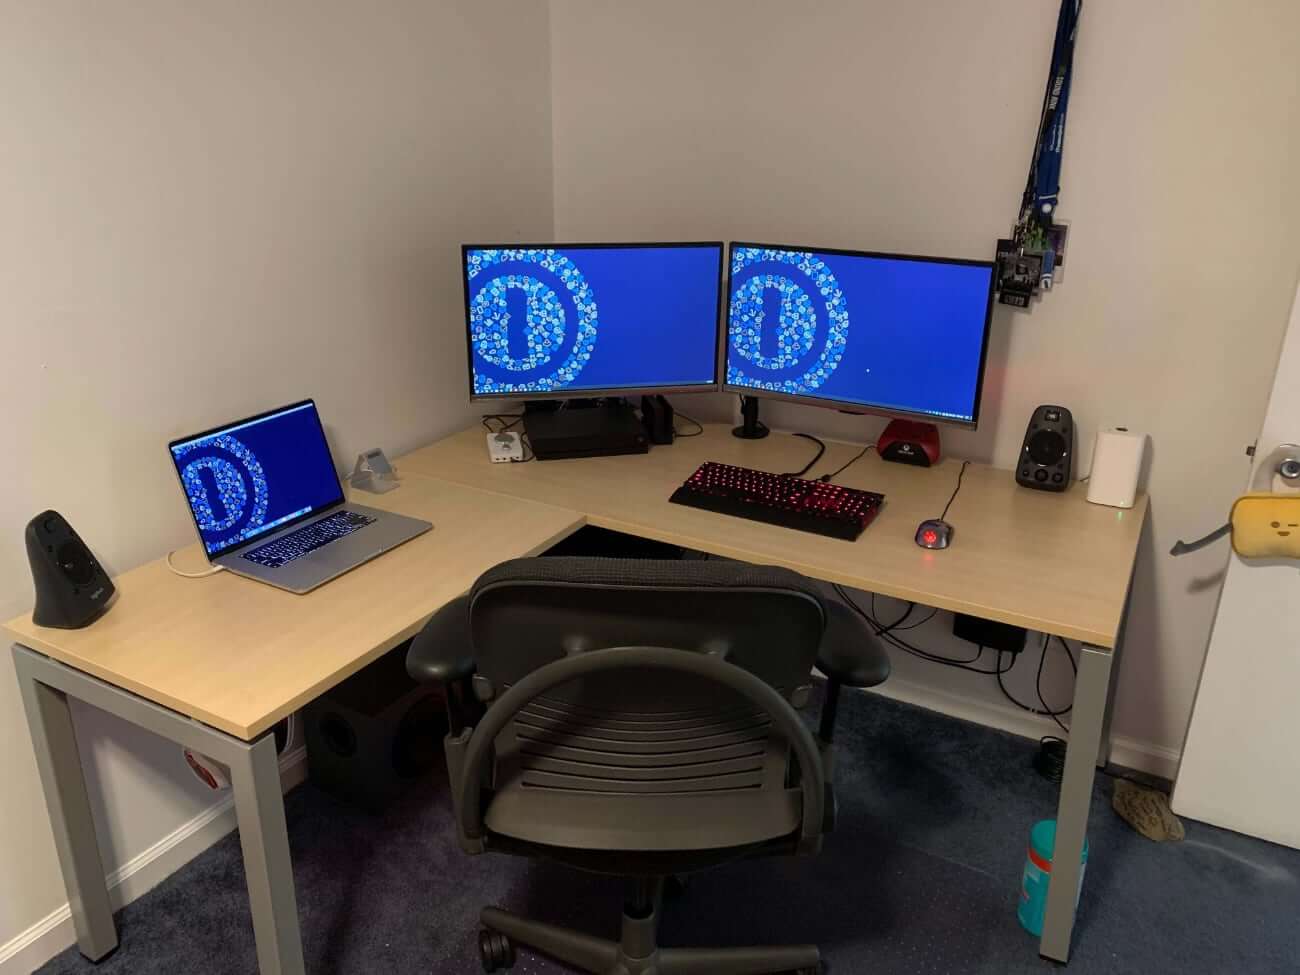 Image of Blake's work from home setup